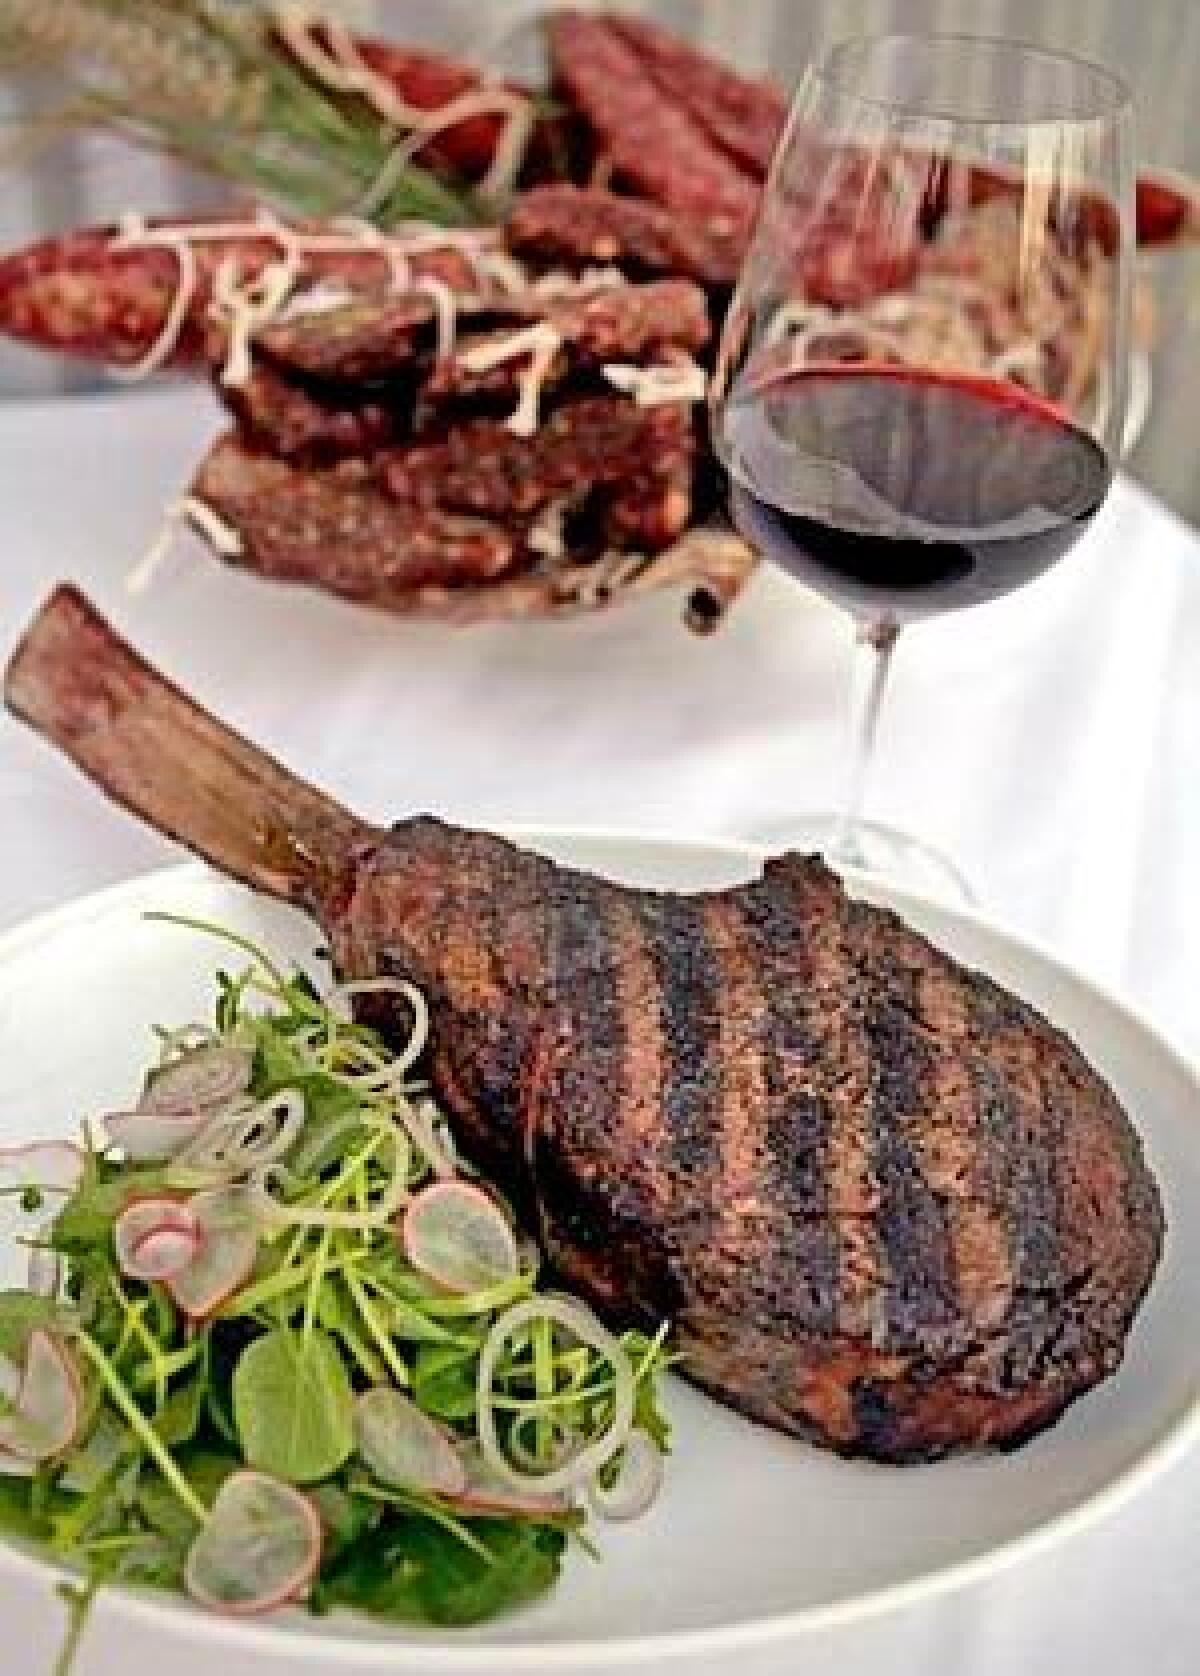 The tomahawk, a 23-ounce Nebraska rib-eye.